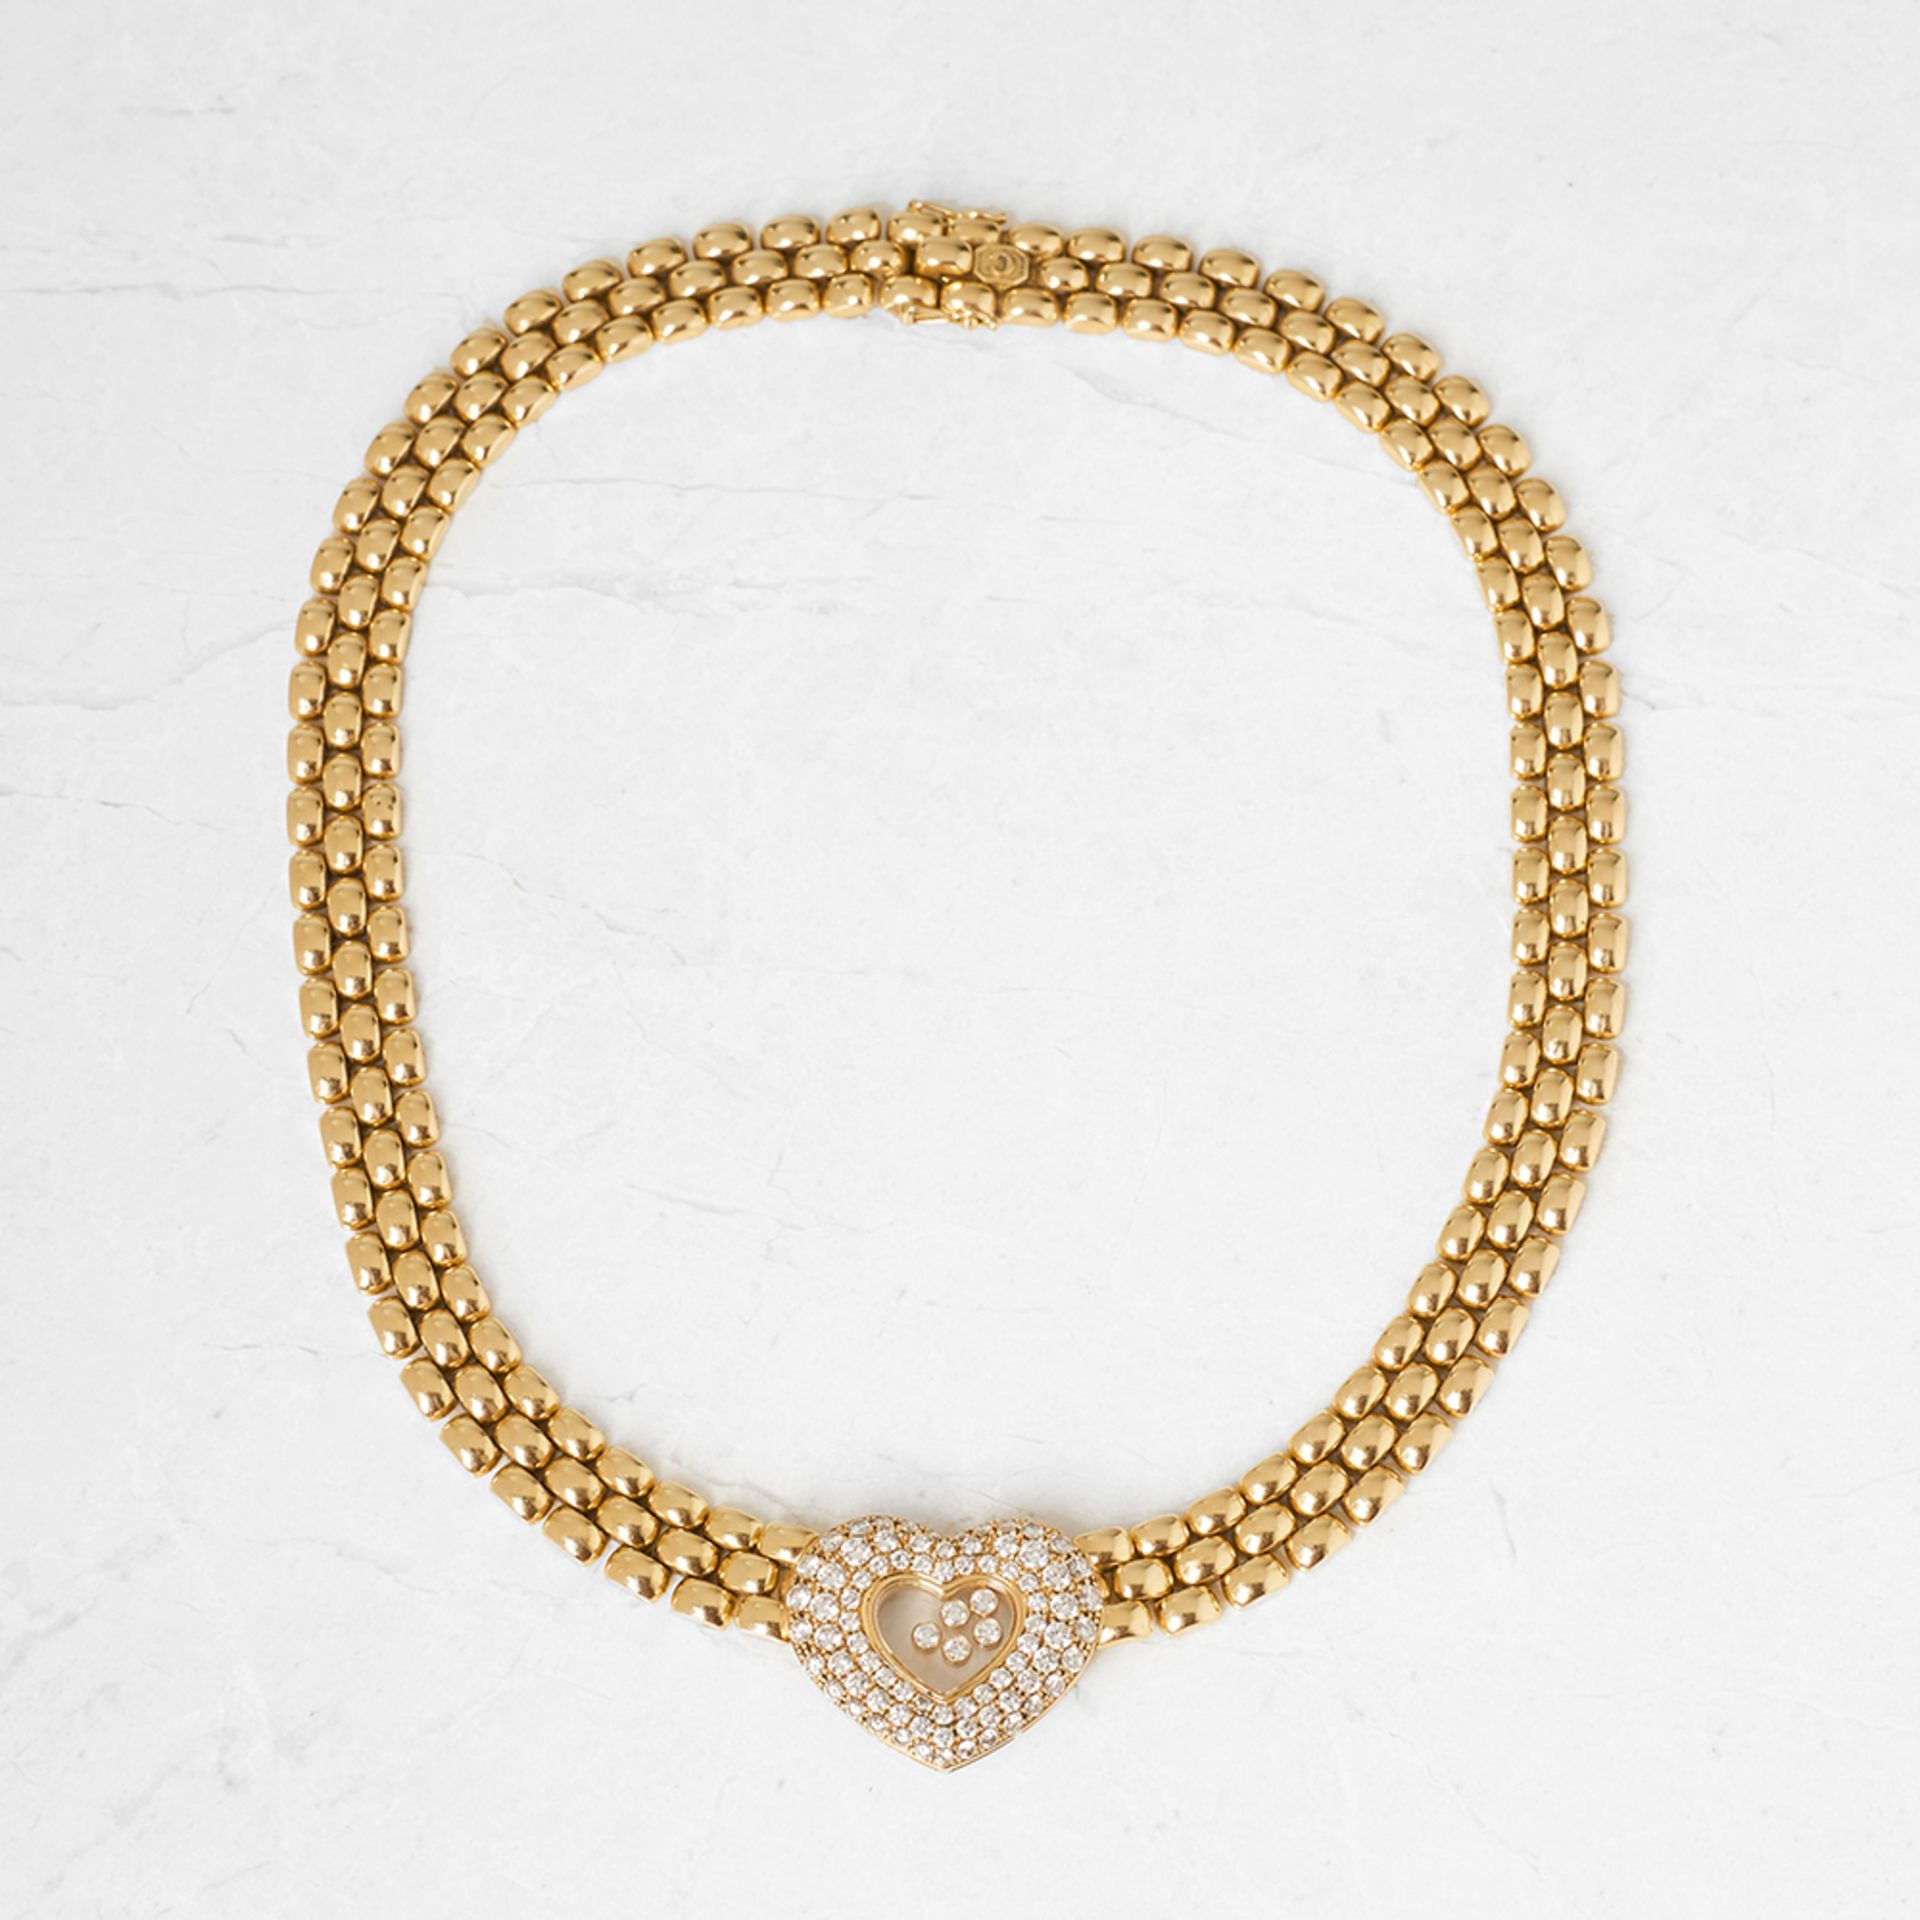 Chopard 18k Yellow Gold Happy Diamonds Necklace - Image 5 of 7